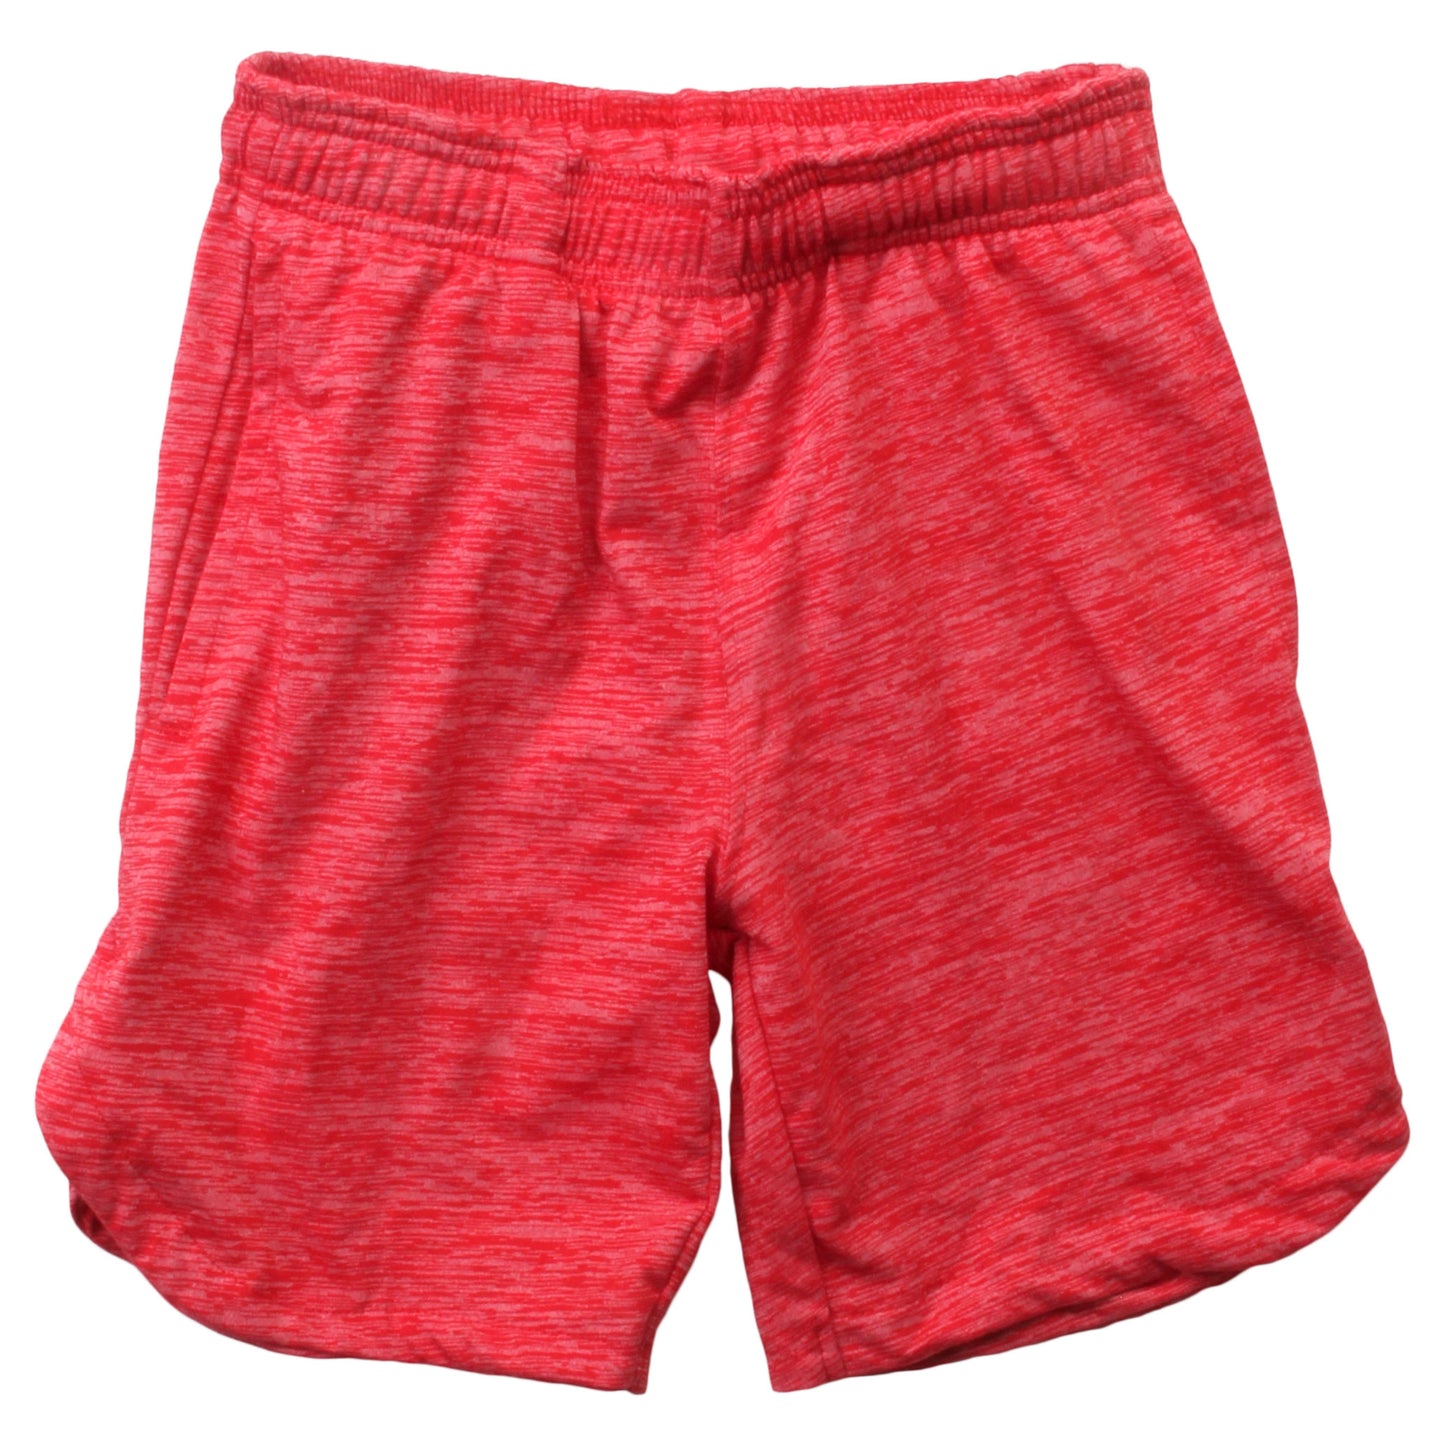 Wes & Willy Boy's Red Cloudy Short